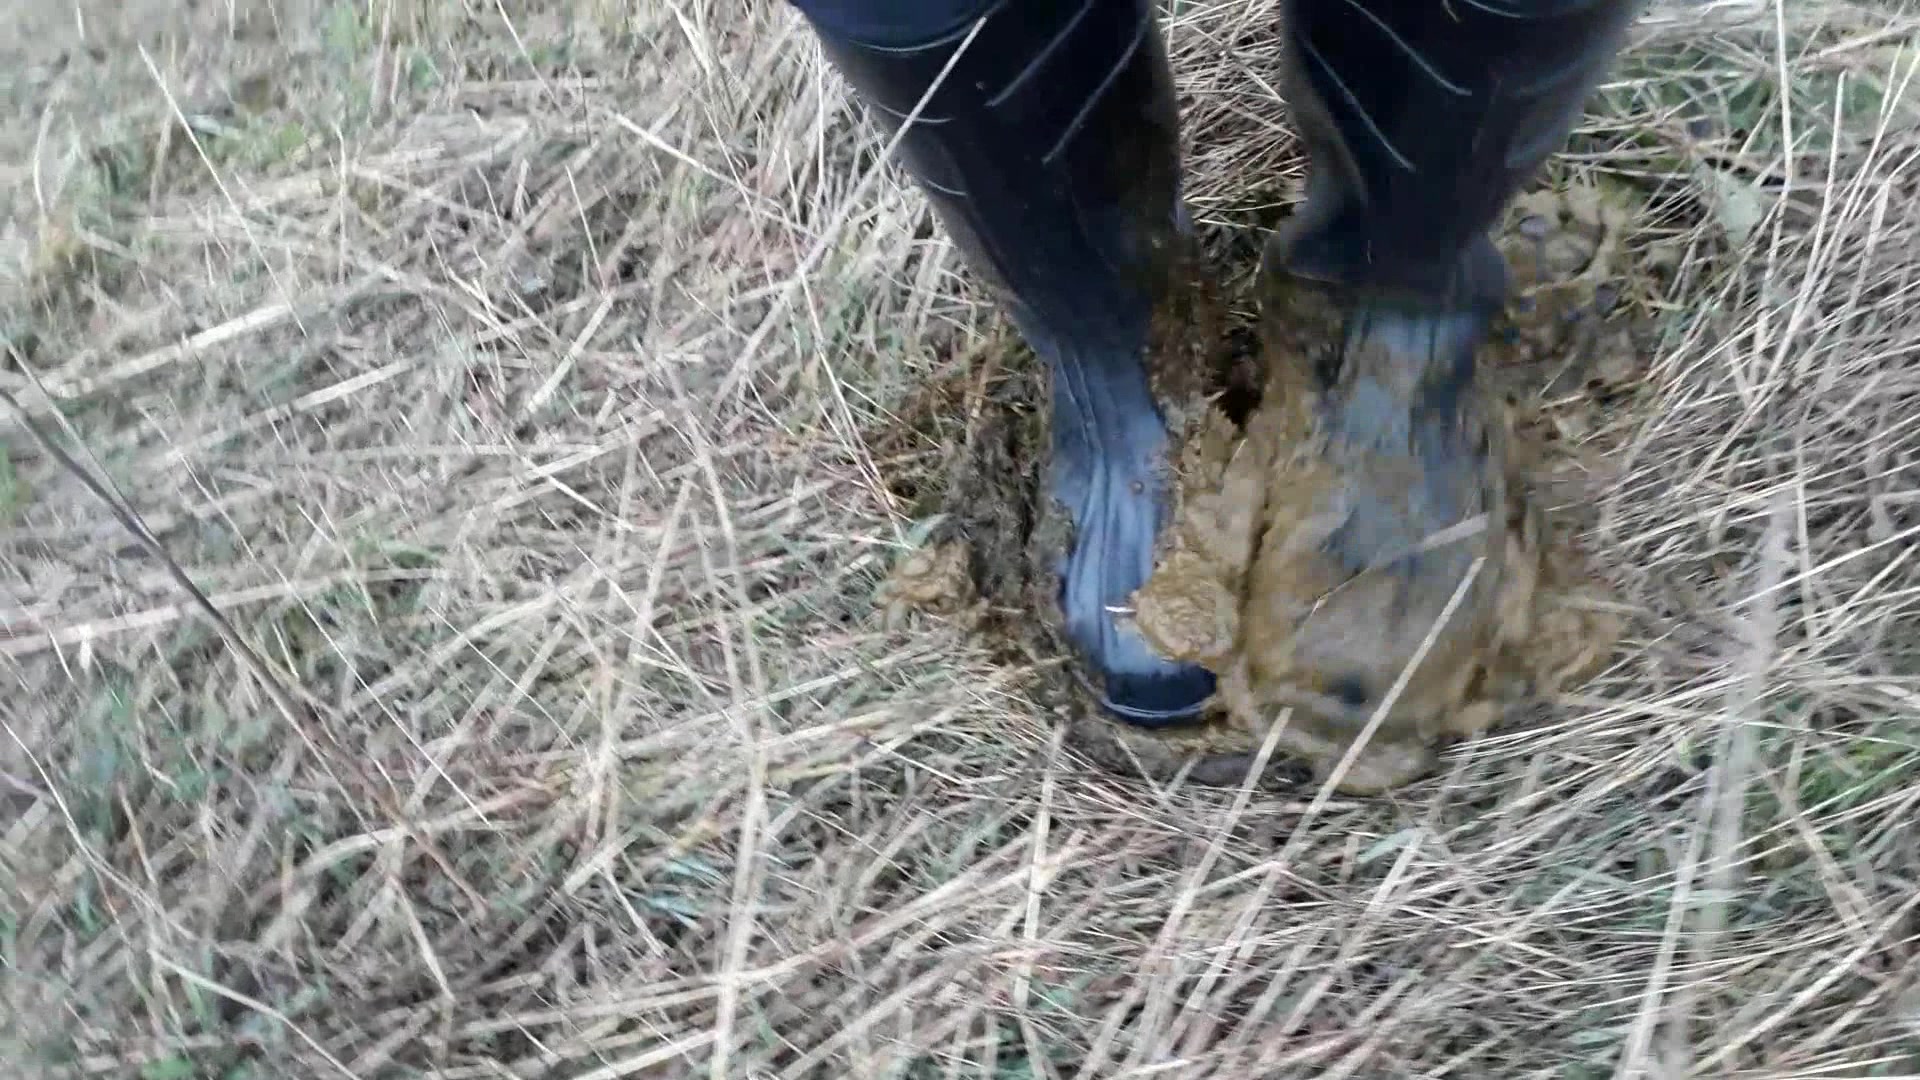 Rubber boots vs cowshit - video 23